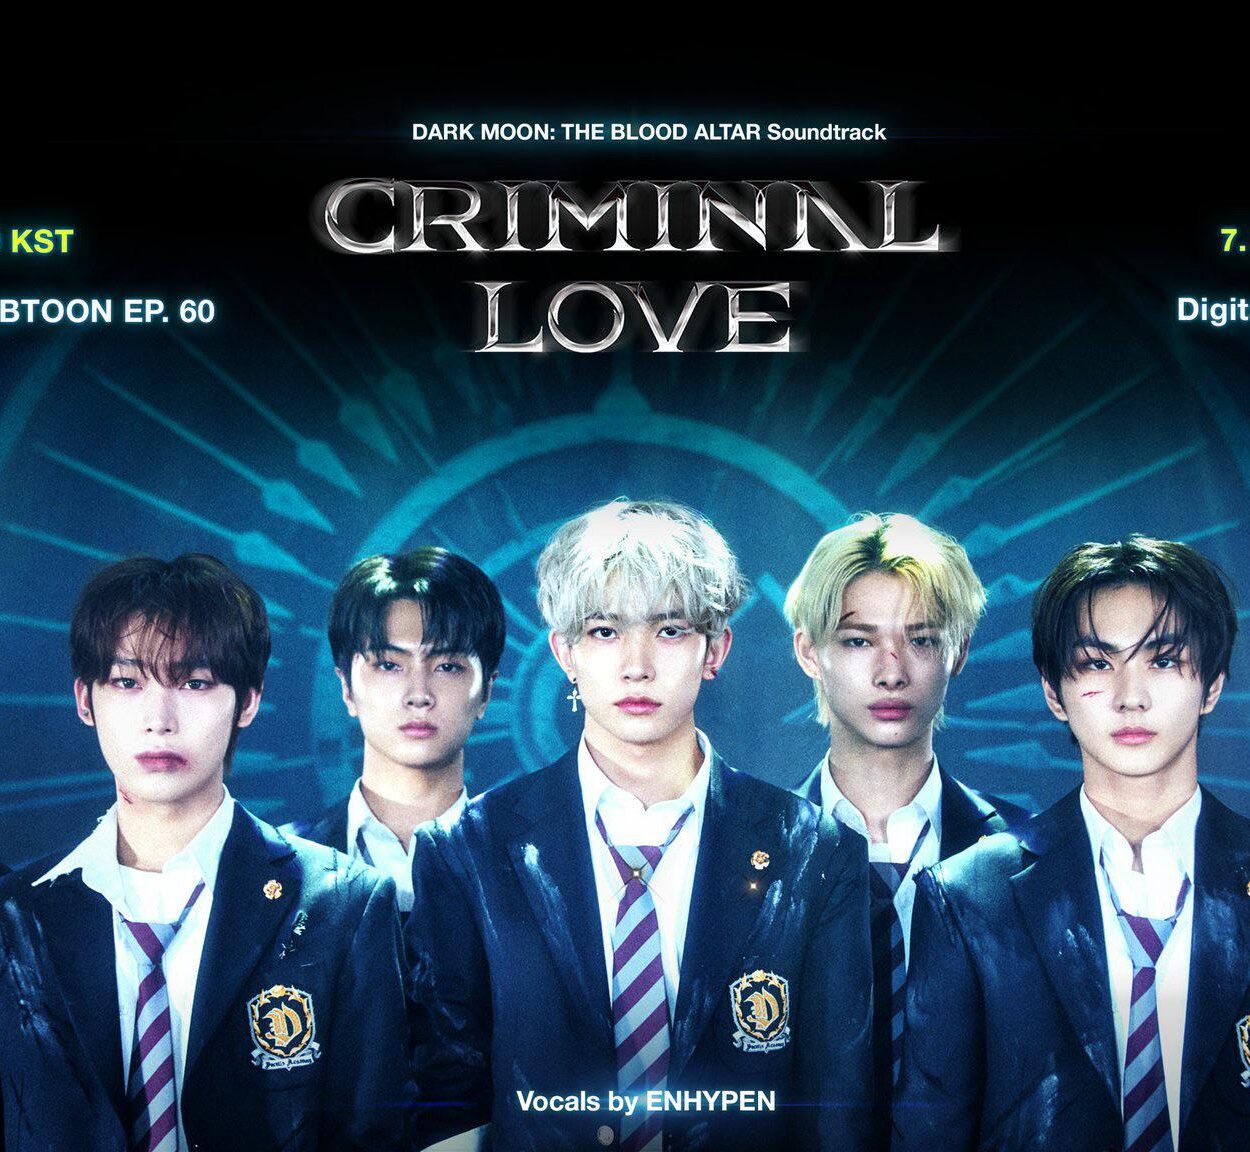 230720 DARK MOON: THE BLOOD ALTAR 2nd Soundtrack ‘CRIMINAL LOVE’ 🖤 is set to be released! Vocals by ENHYPEN